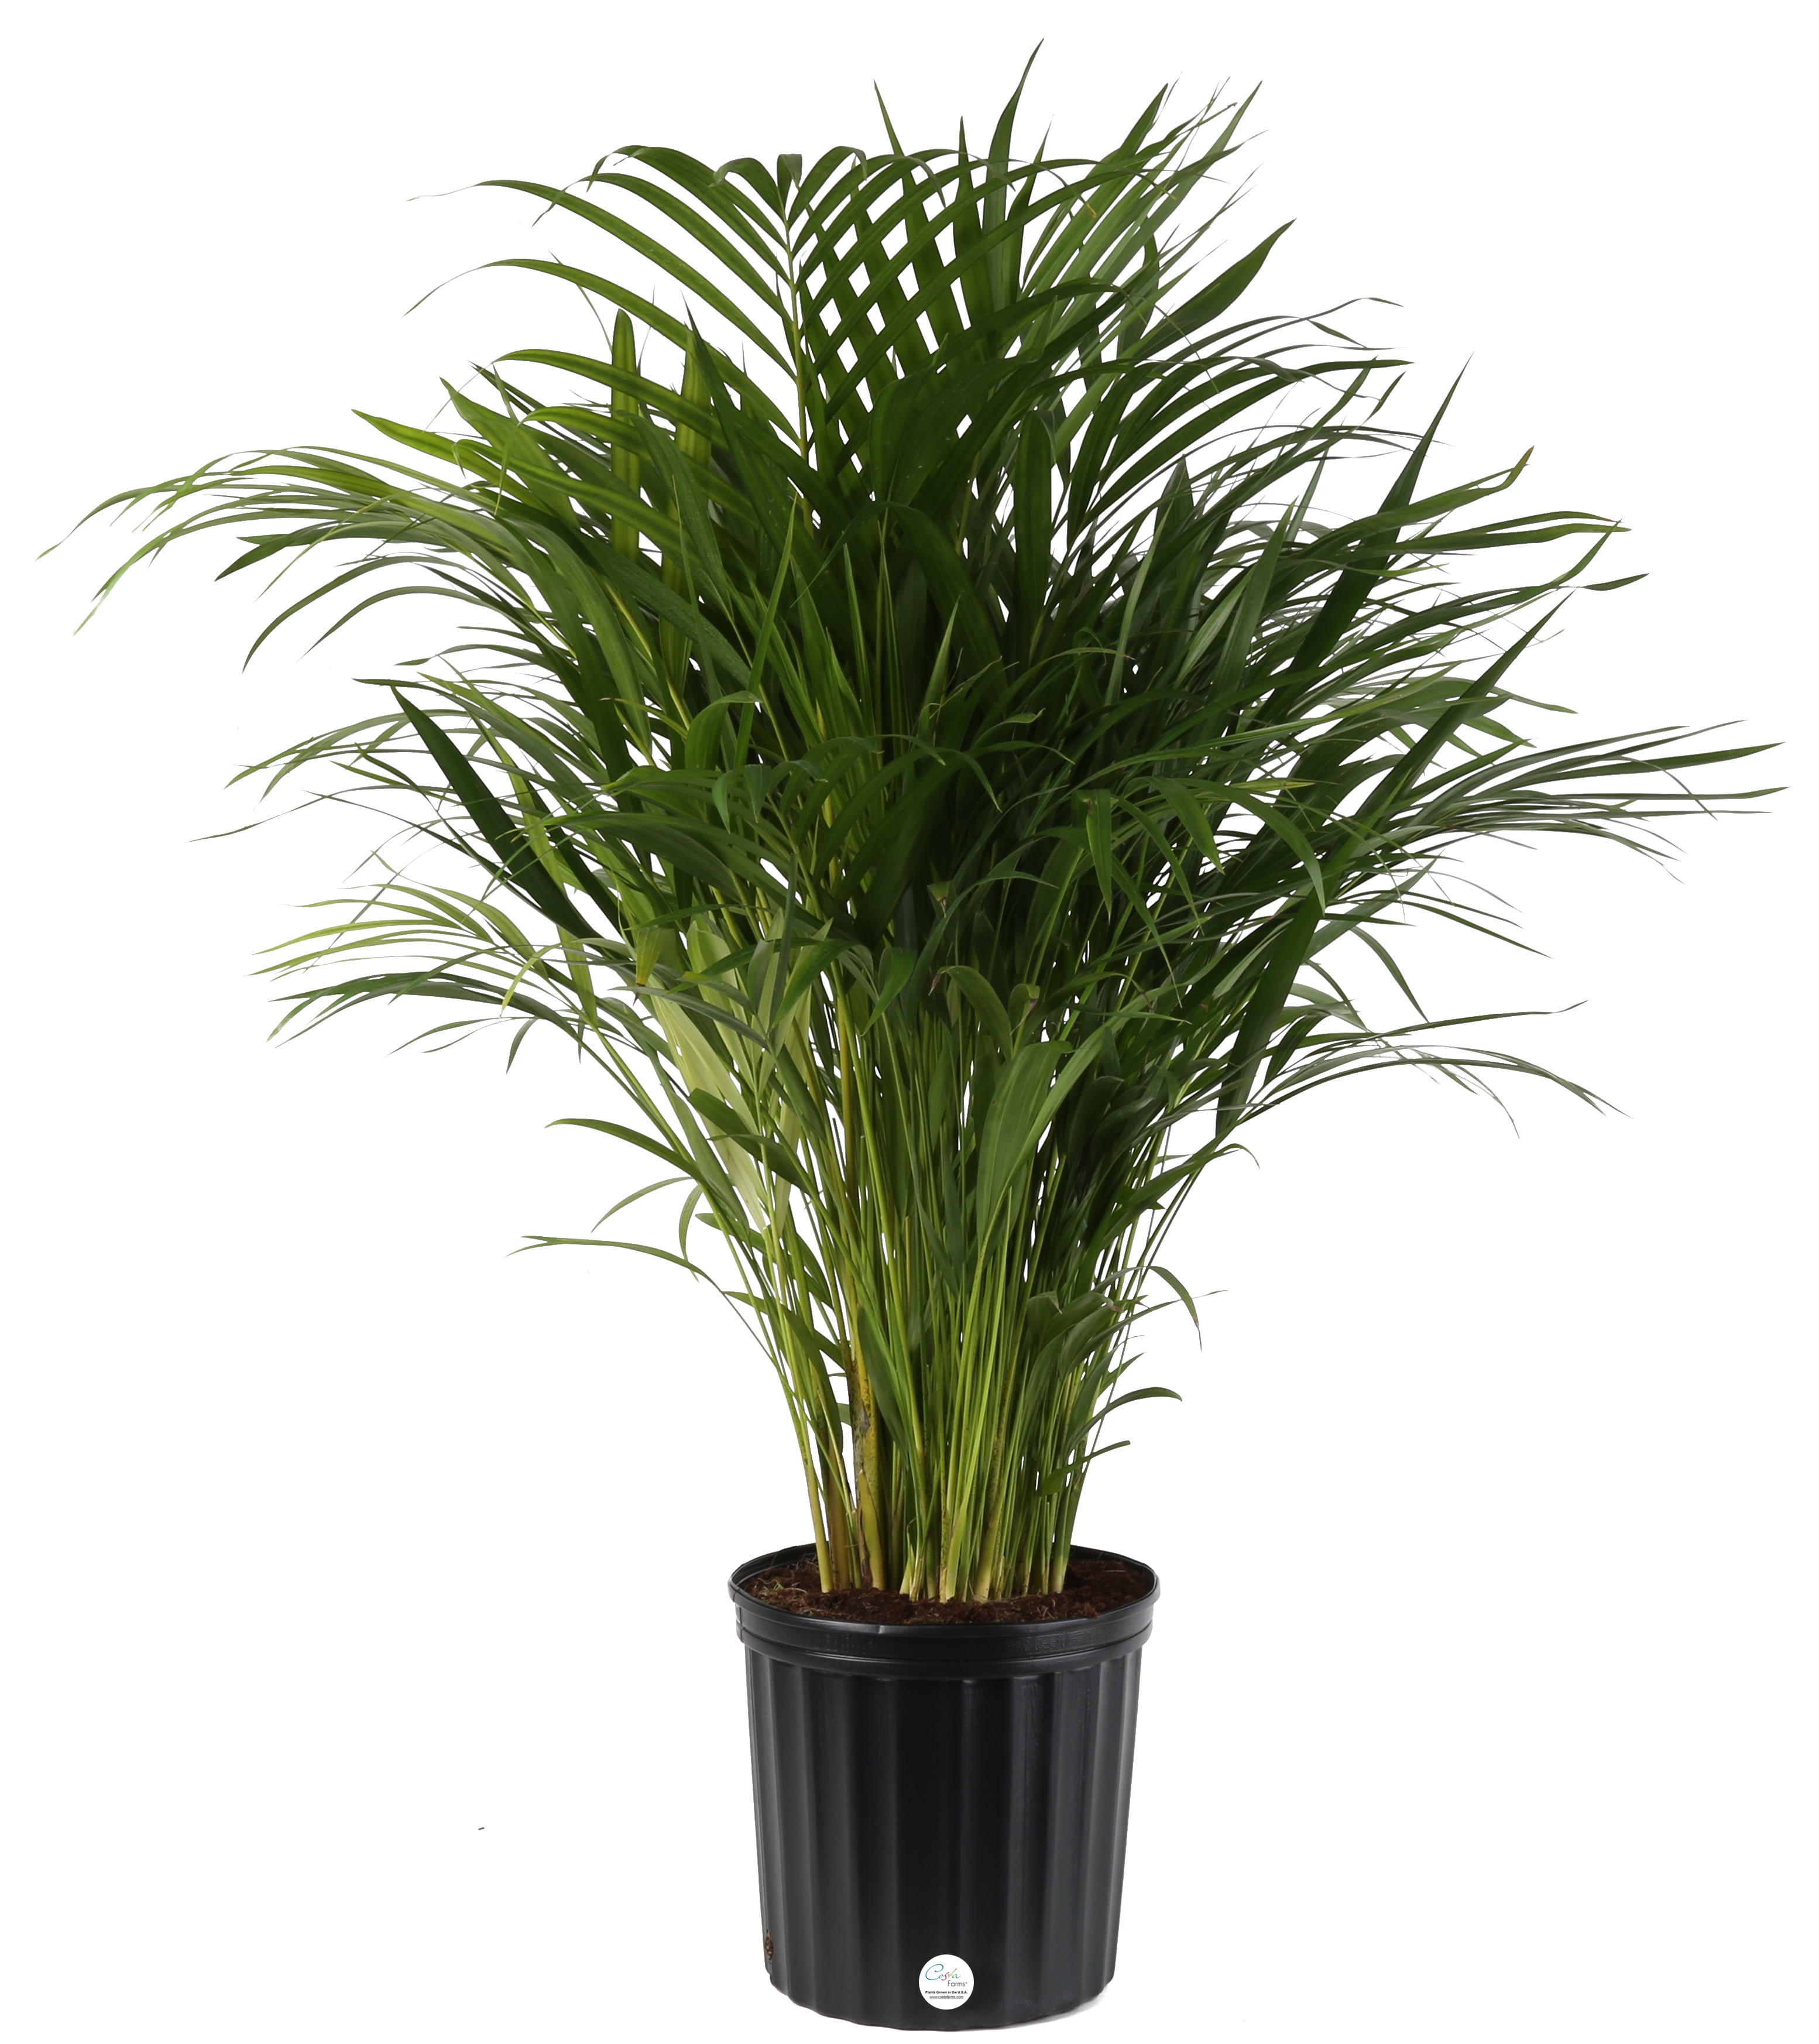 Costa Farms Live Indoor 3ft Tall Areca Palm Tree 10in Grower Pot